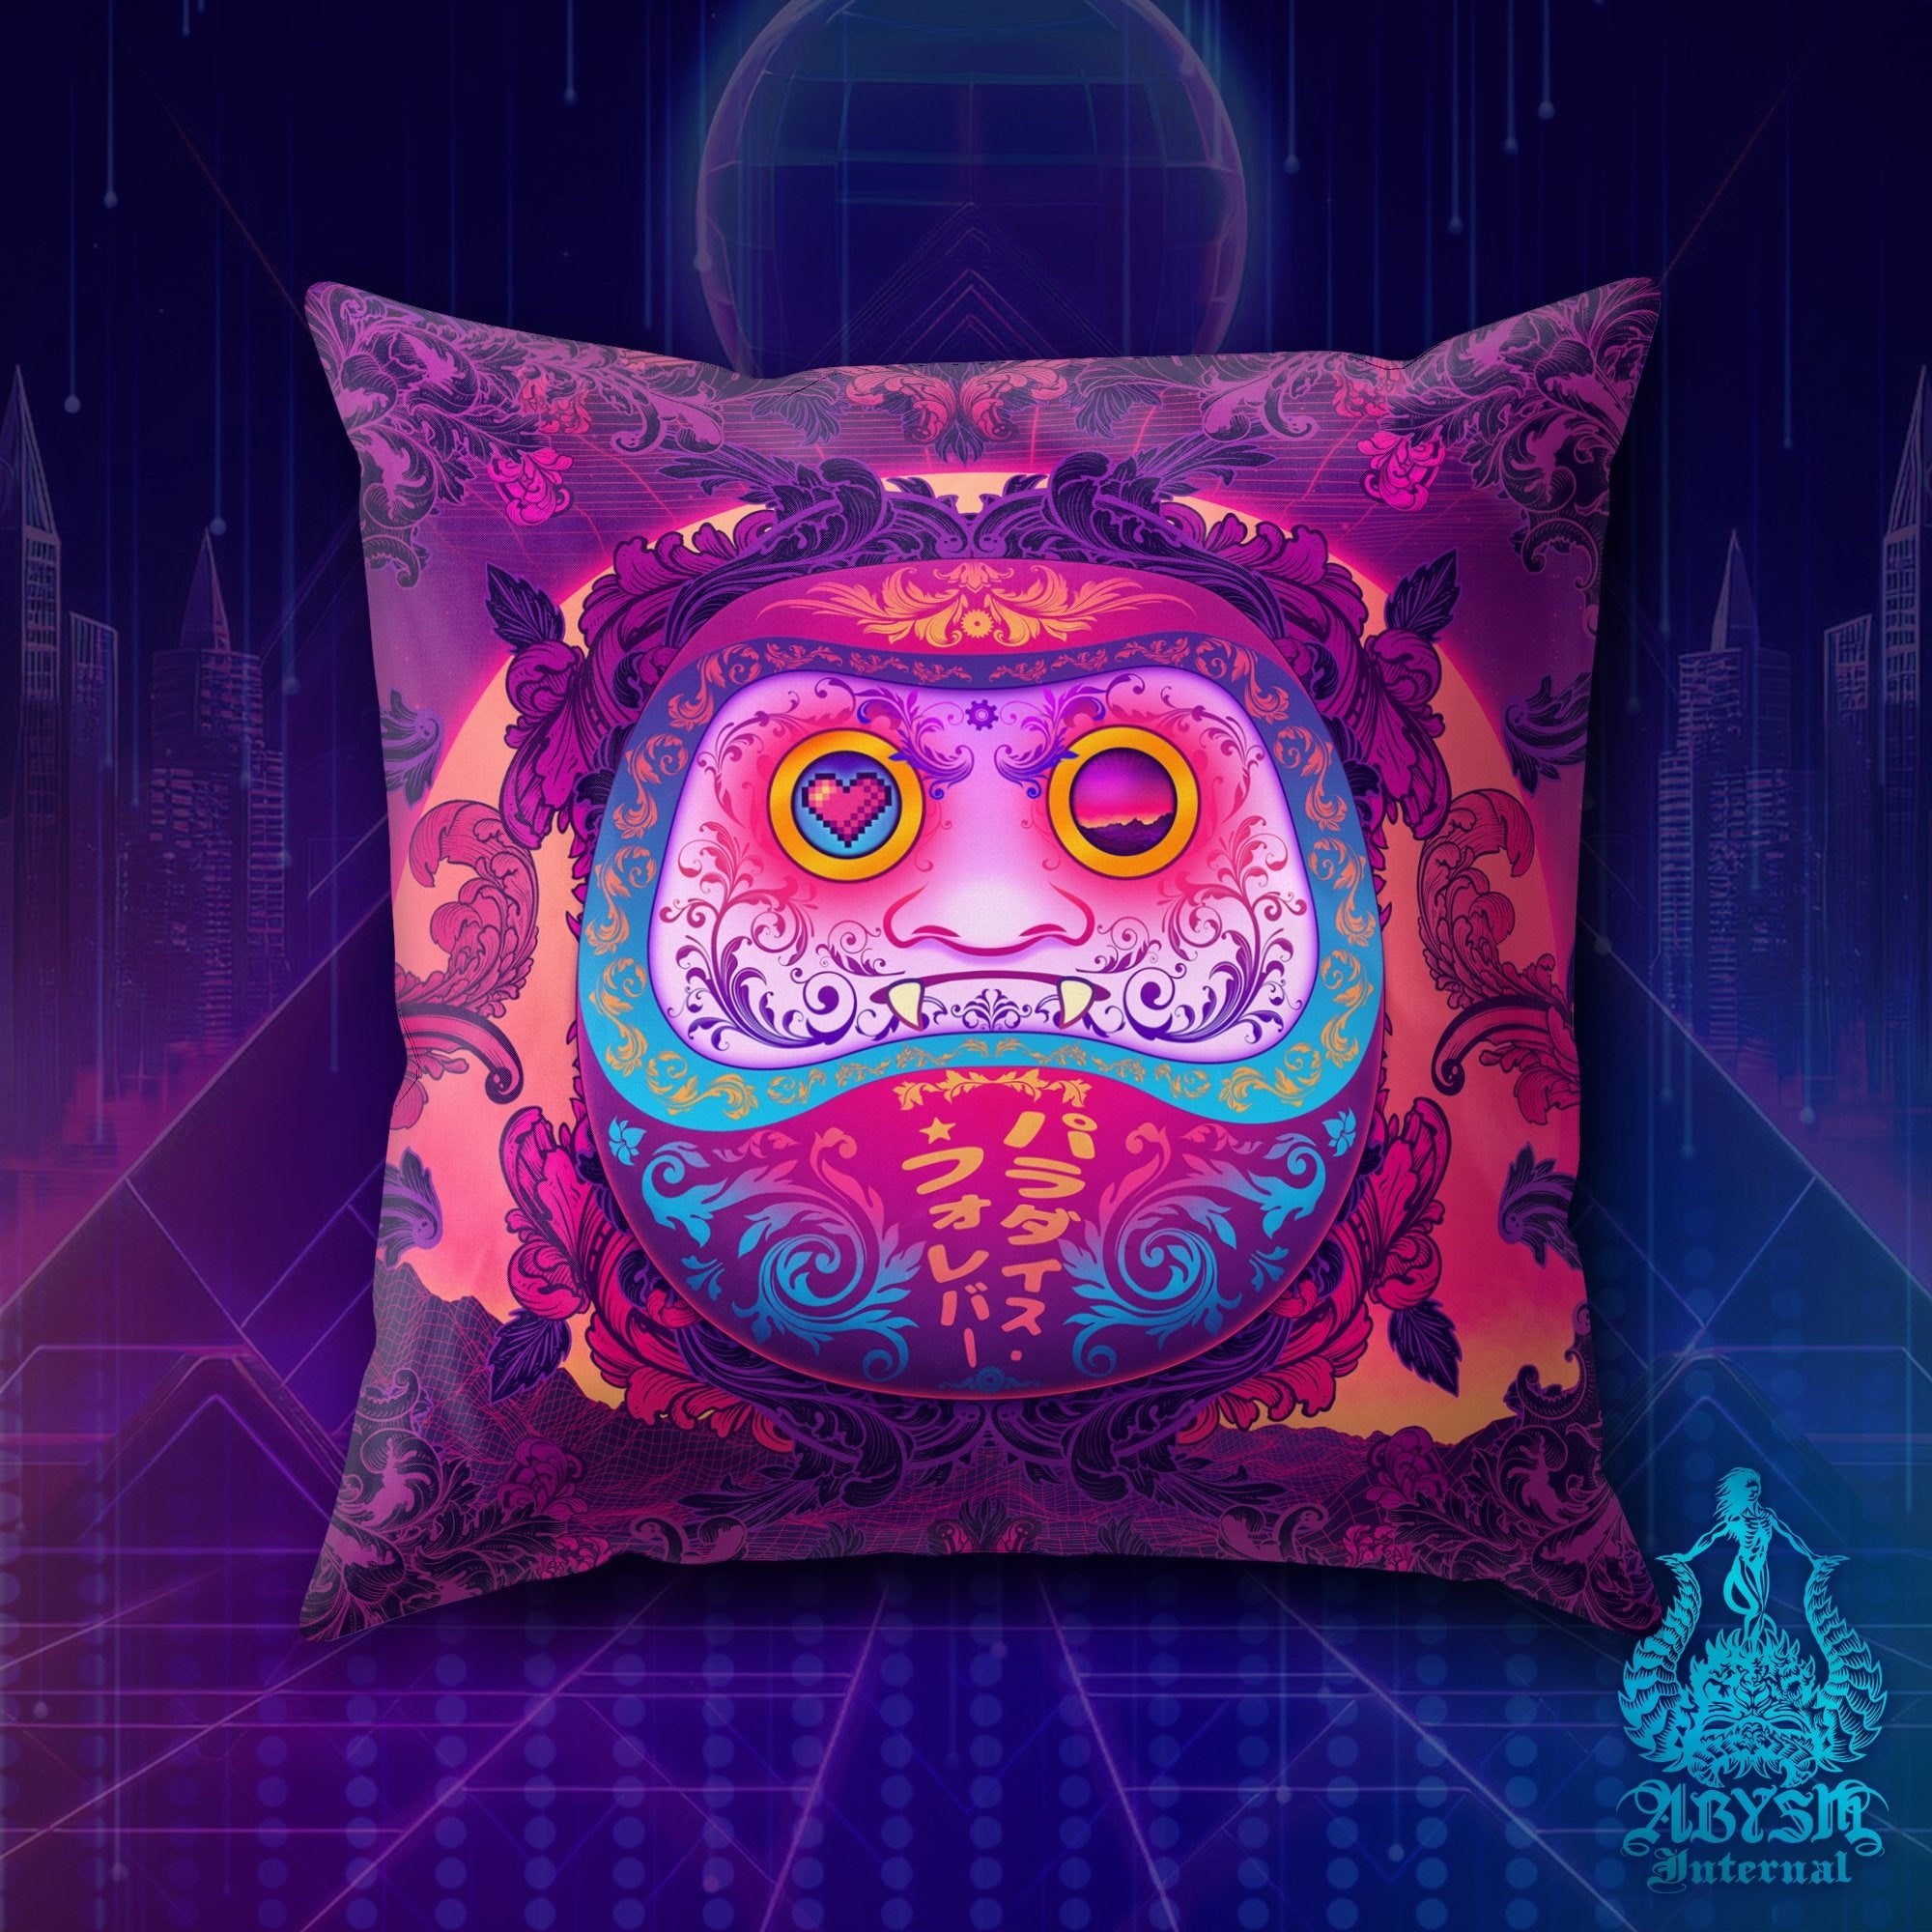 Japanese Vaporwave Throw Pillow, Anime Decorative Accent Cushion, Synthwave and Retrowave 80s Room Decor, Psychedelic Art Print, Gamer Gift - Daruma - Abysm Internal